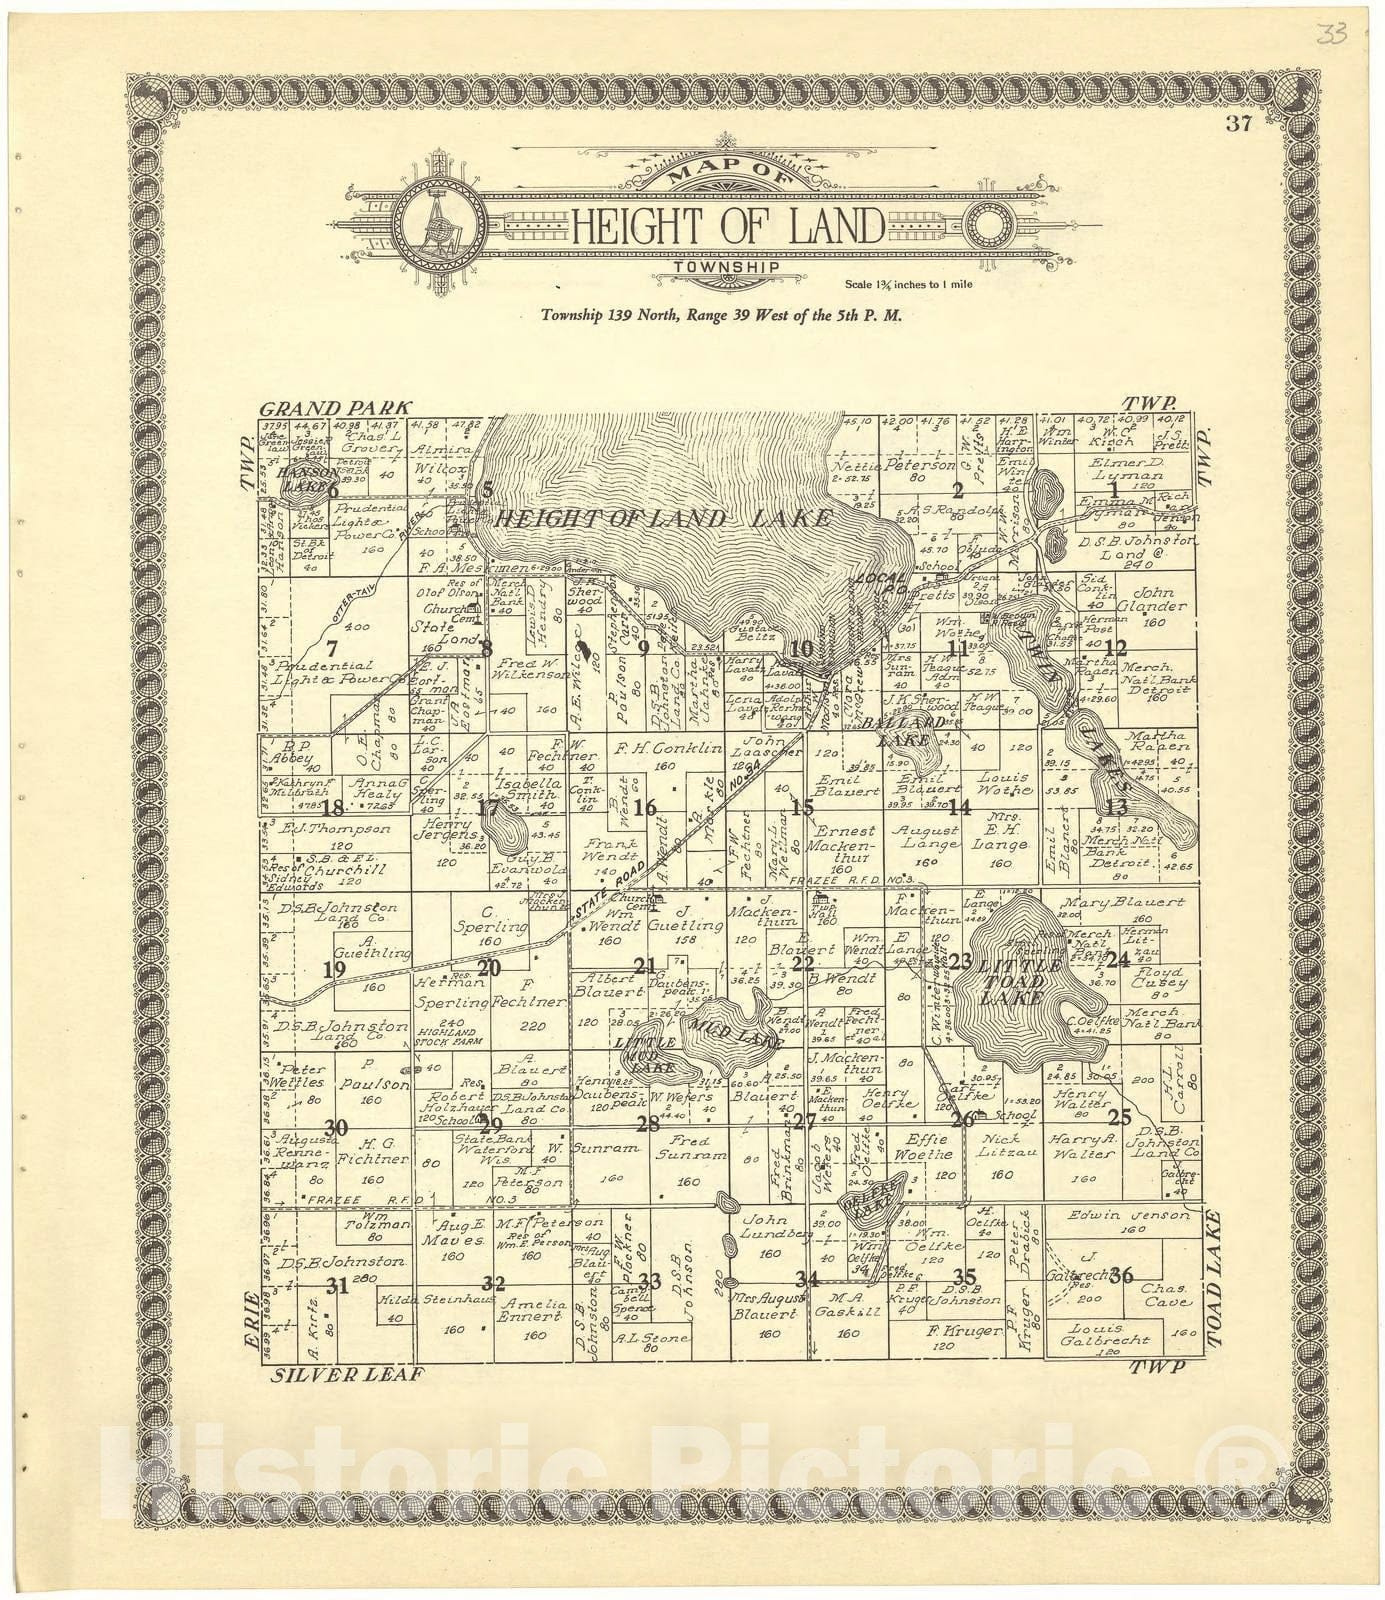 Historic 1929 Map - Standard Atlas of Becker County, Minnesota - Map of Height of Land Township